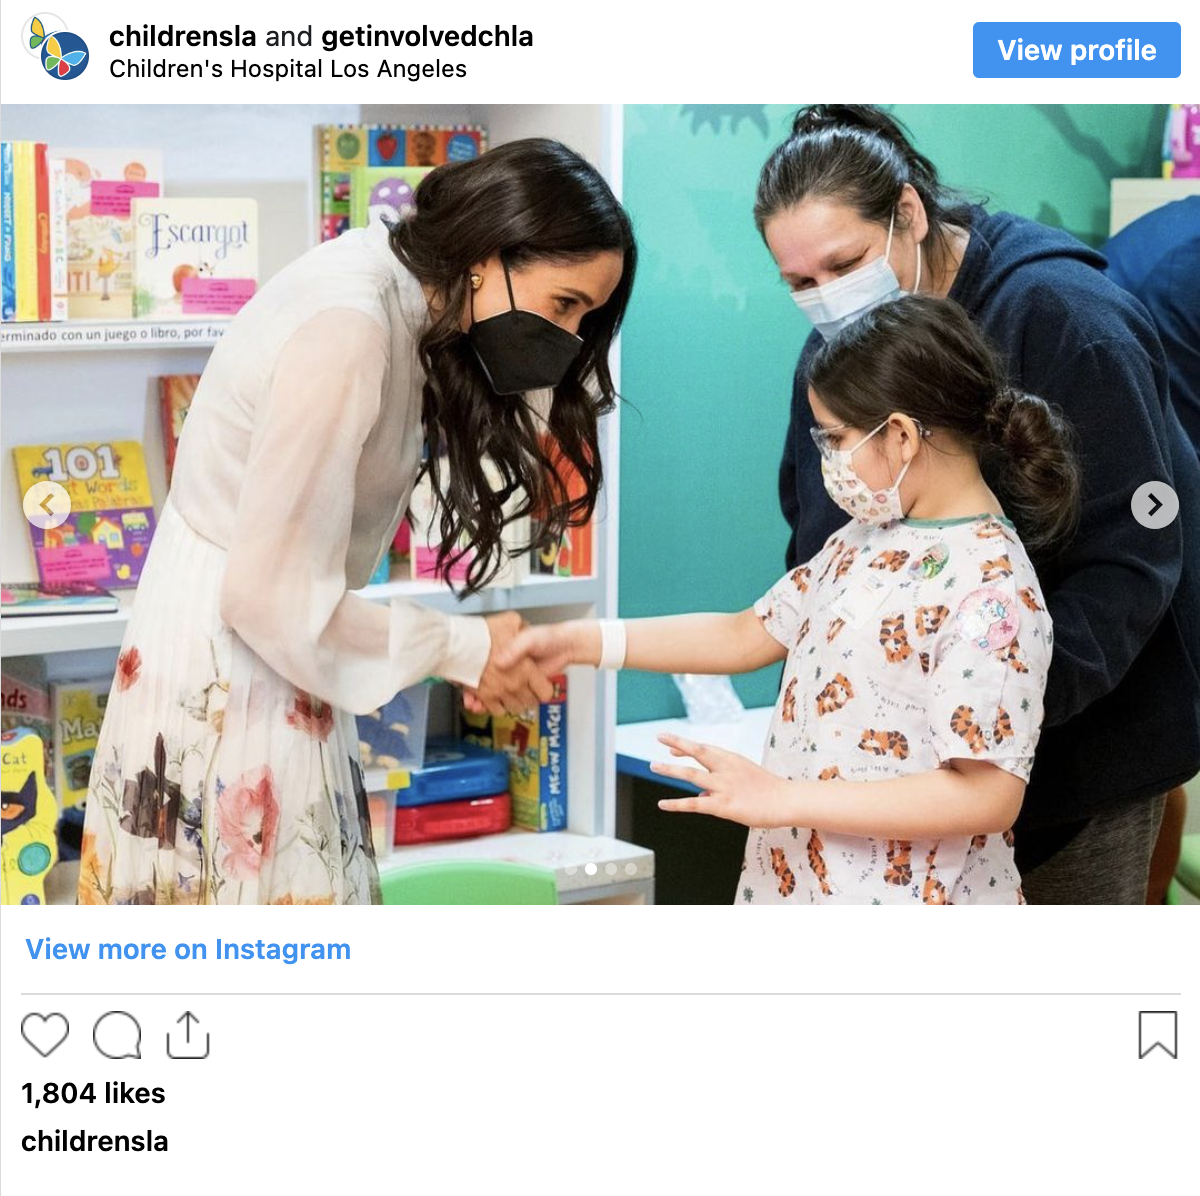 Meghan Markle Makes Surprise Rare Public Appearance: 'Always spreading joy' | People can’t stop talking about Meghan Markle, the Duchess of Sussex’s latest public appearance.